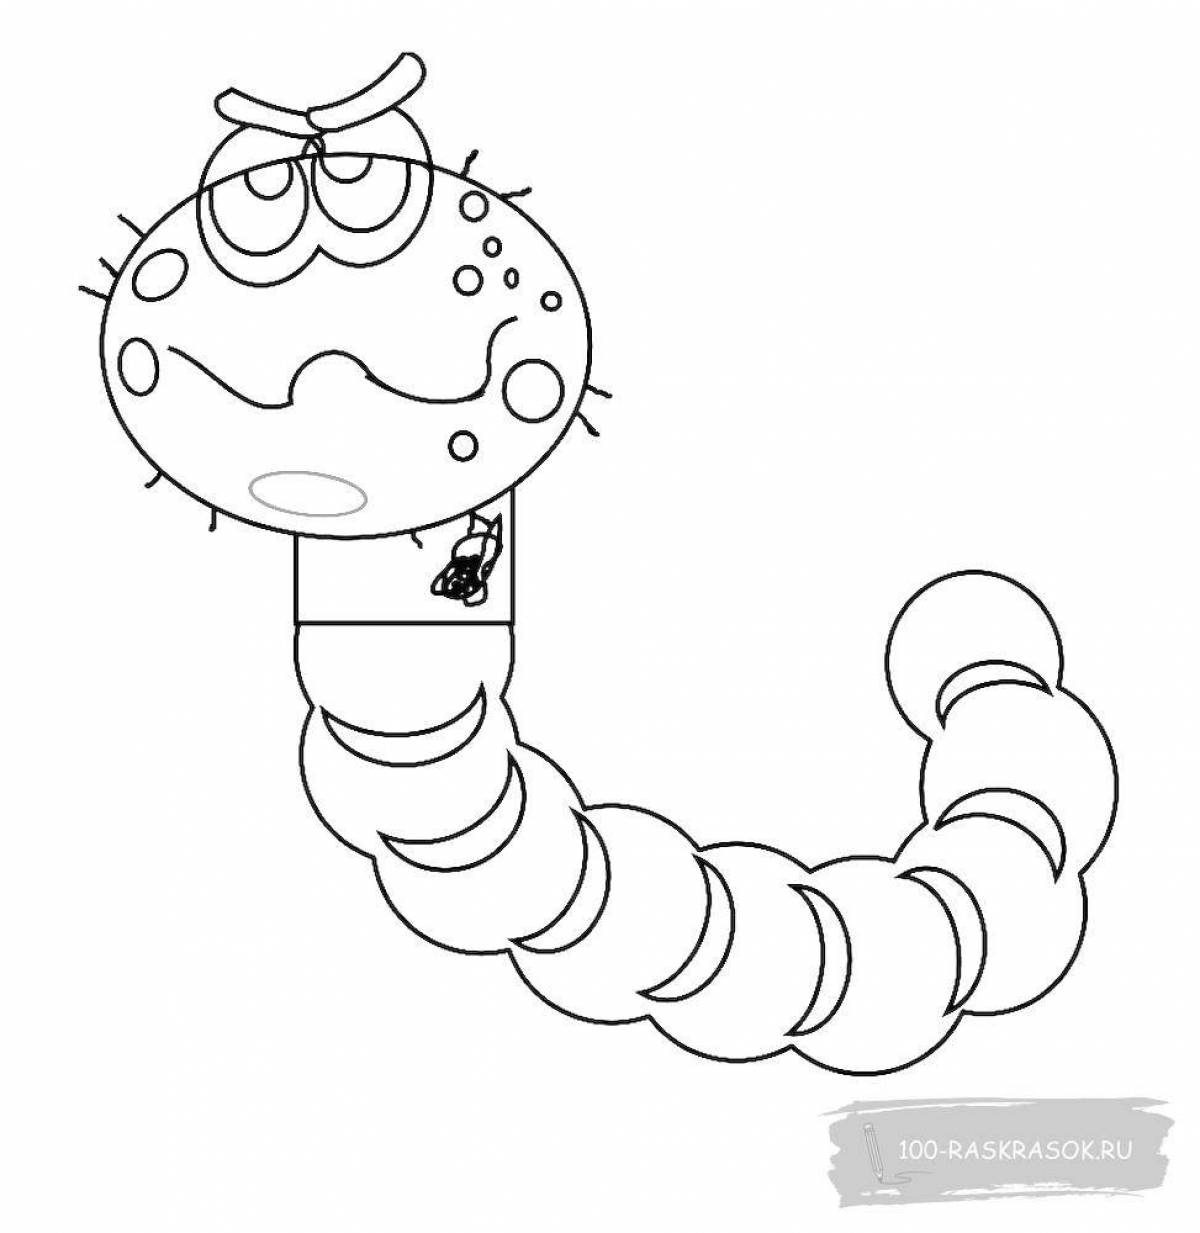 Worm for kids #11